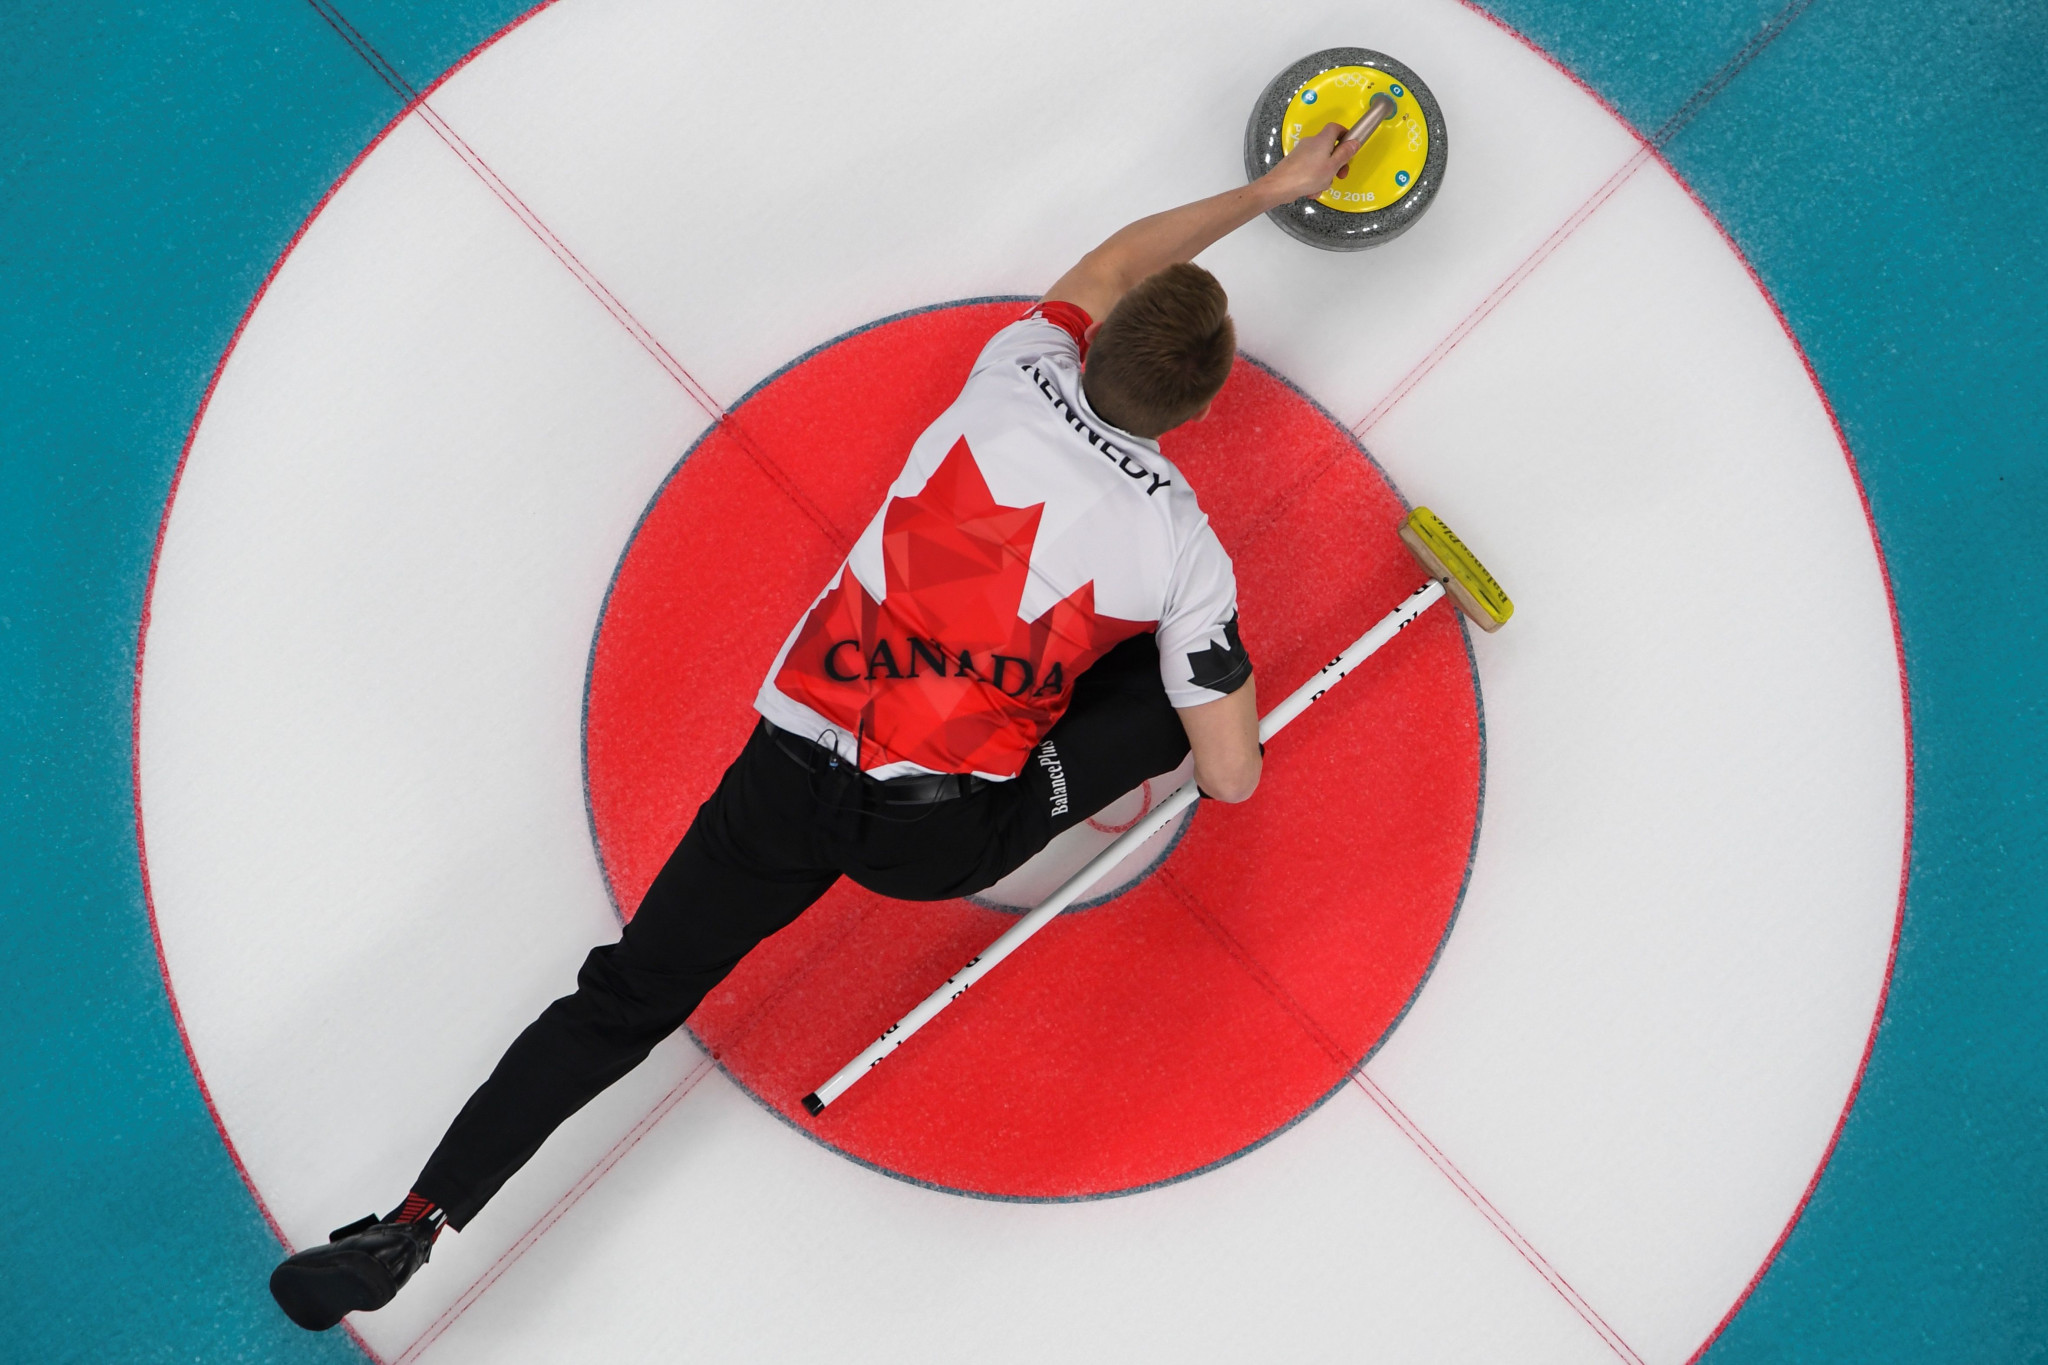 Canada continue charge for third World Mixed Curling Championships gold with win over Finland